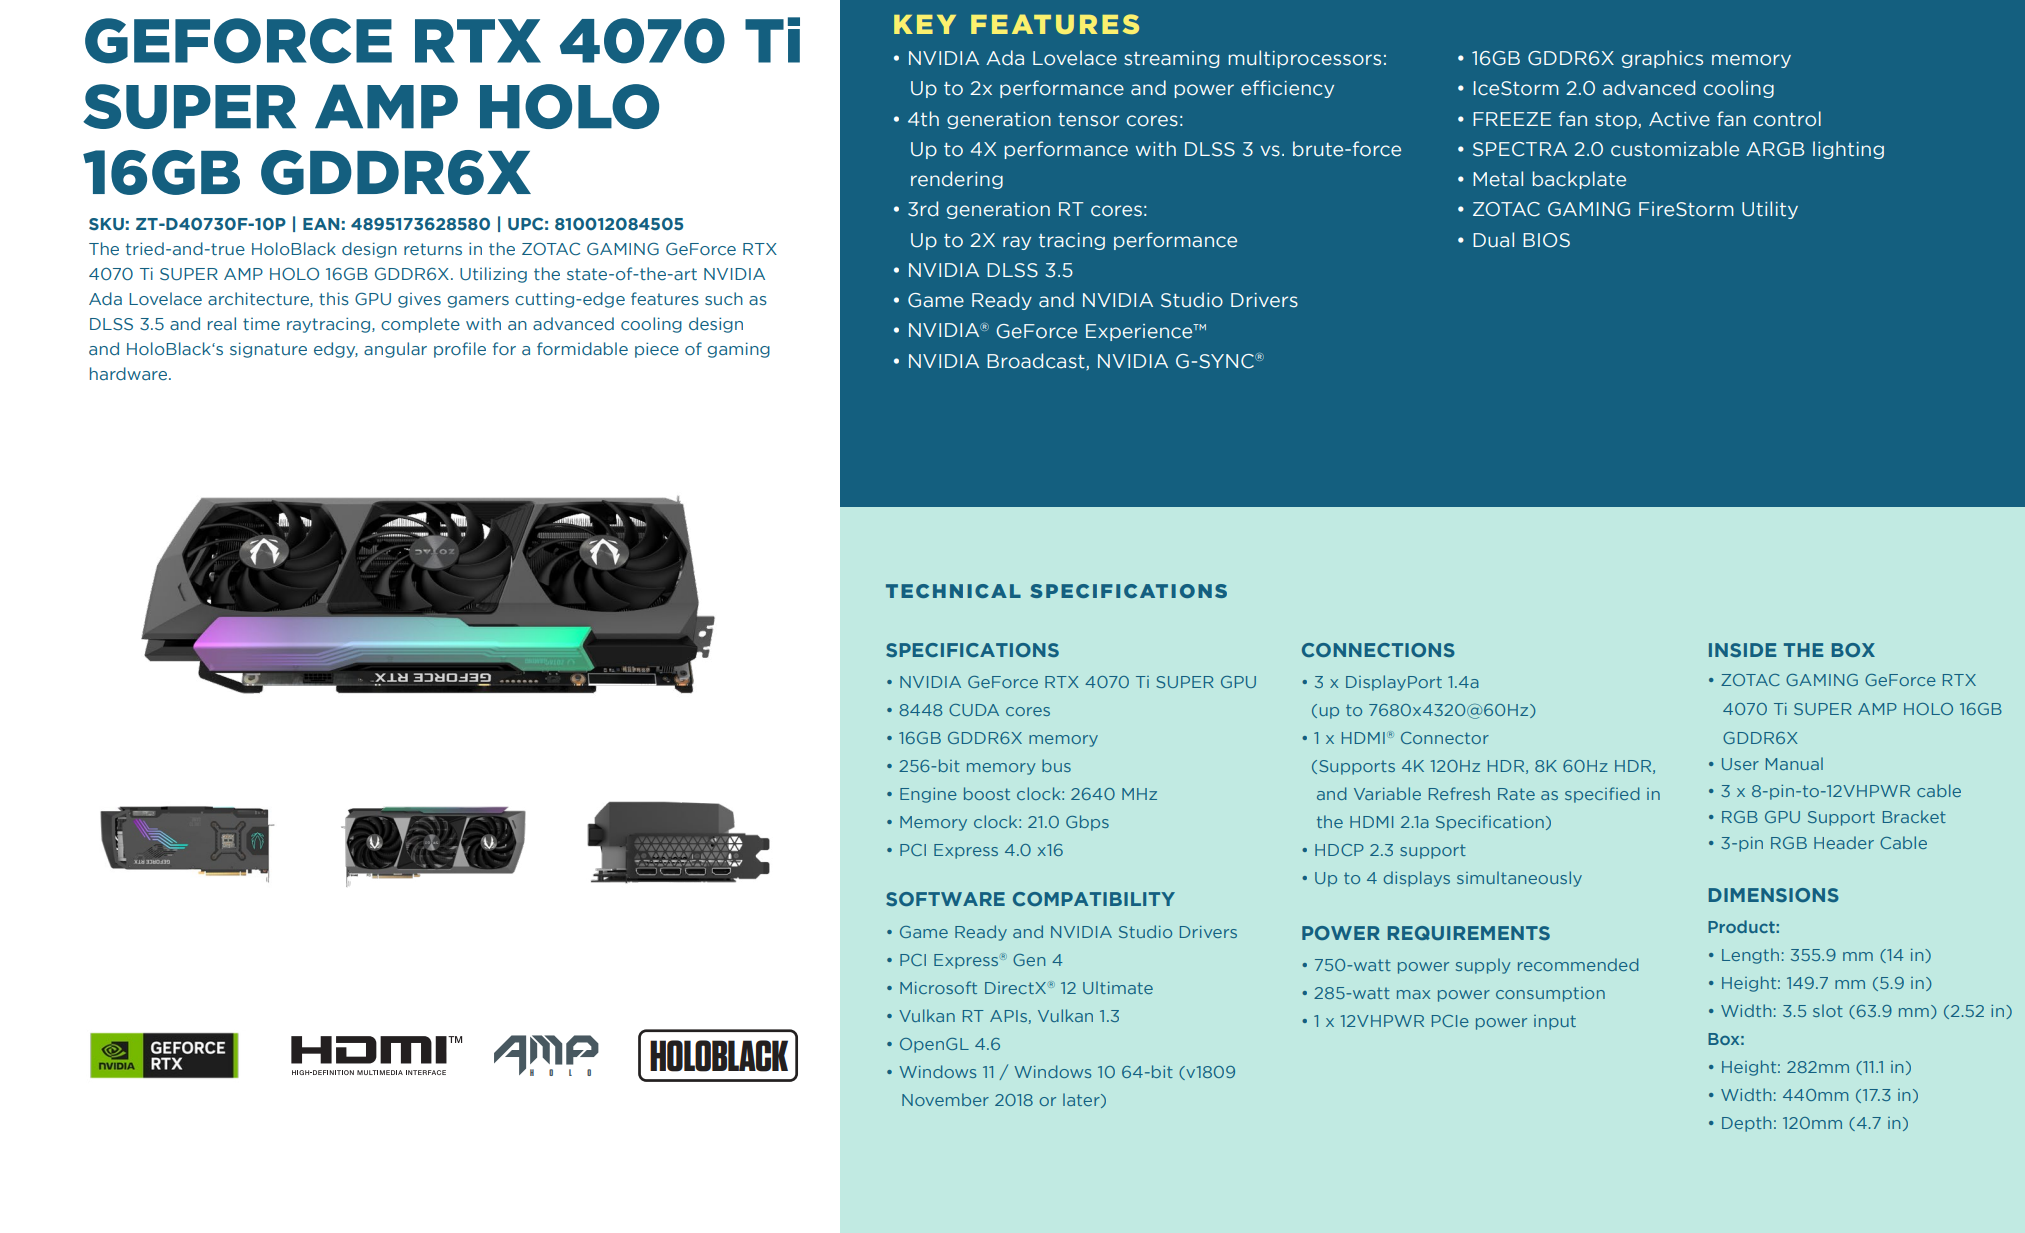 A large marketing image providing additional information about the product ZOTAC GAMING GeForce RTX 4070 Ti SUPER AMP HOLO 16GB GDDR6X - Additional alt info not provided